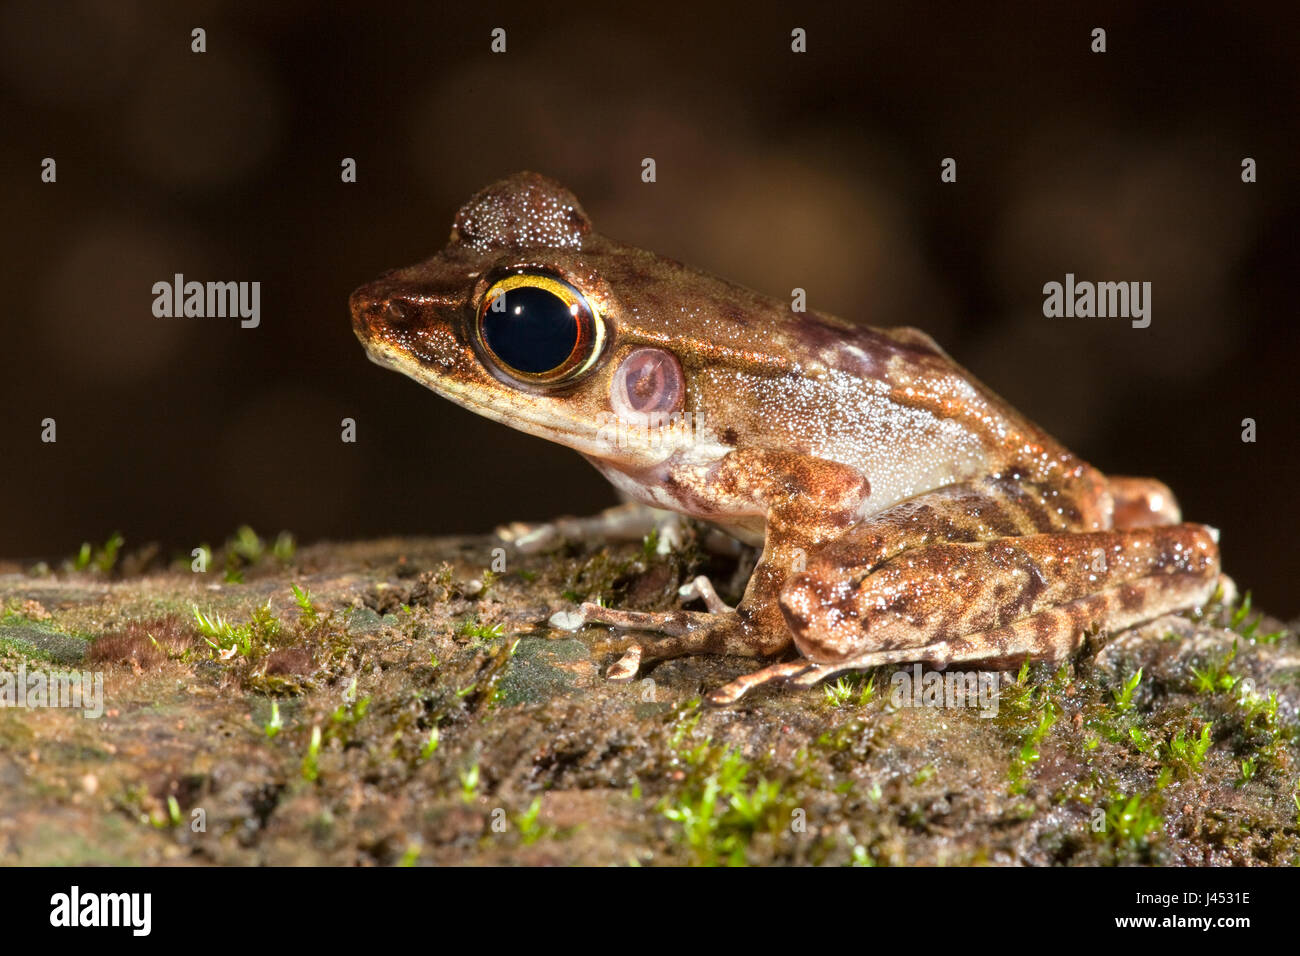 photo of a Northern torrent frog on a rock Stock Photo